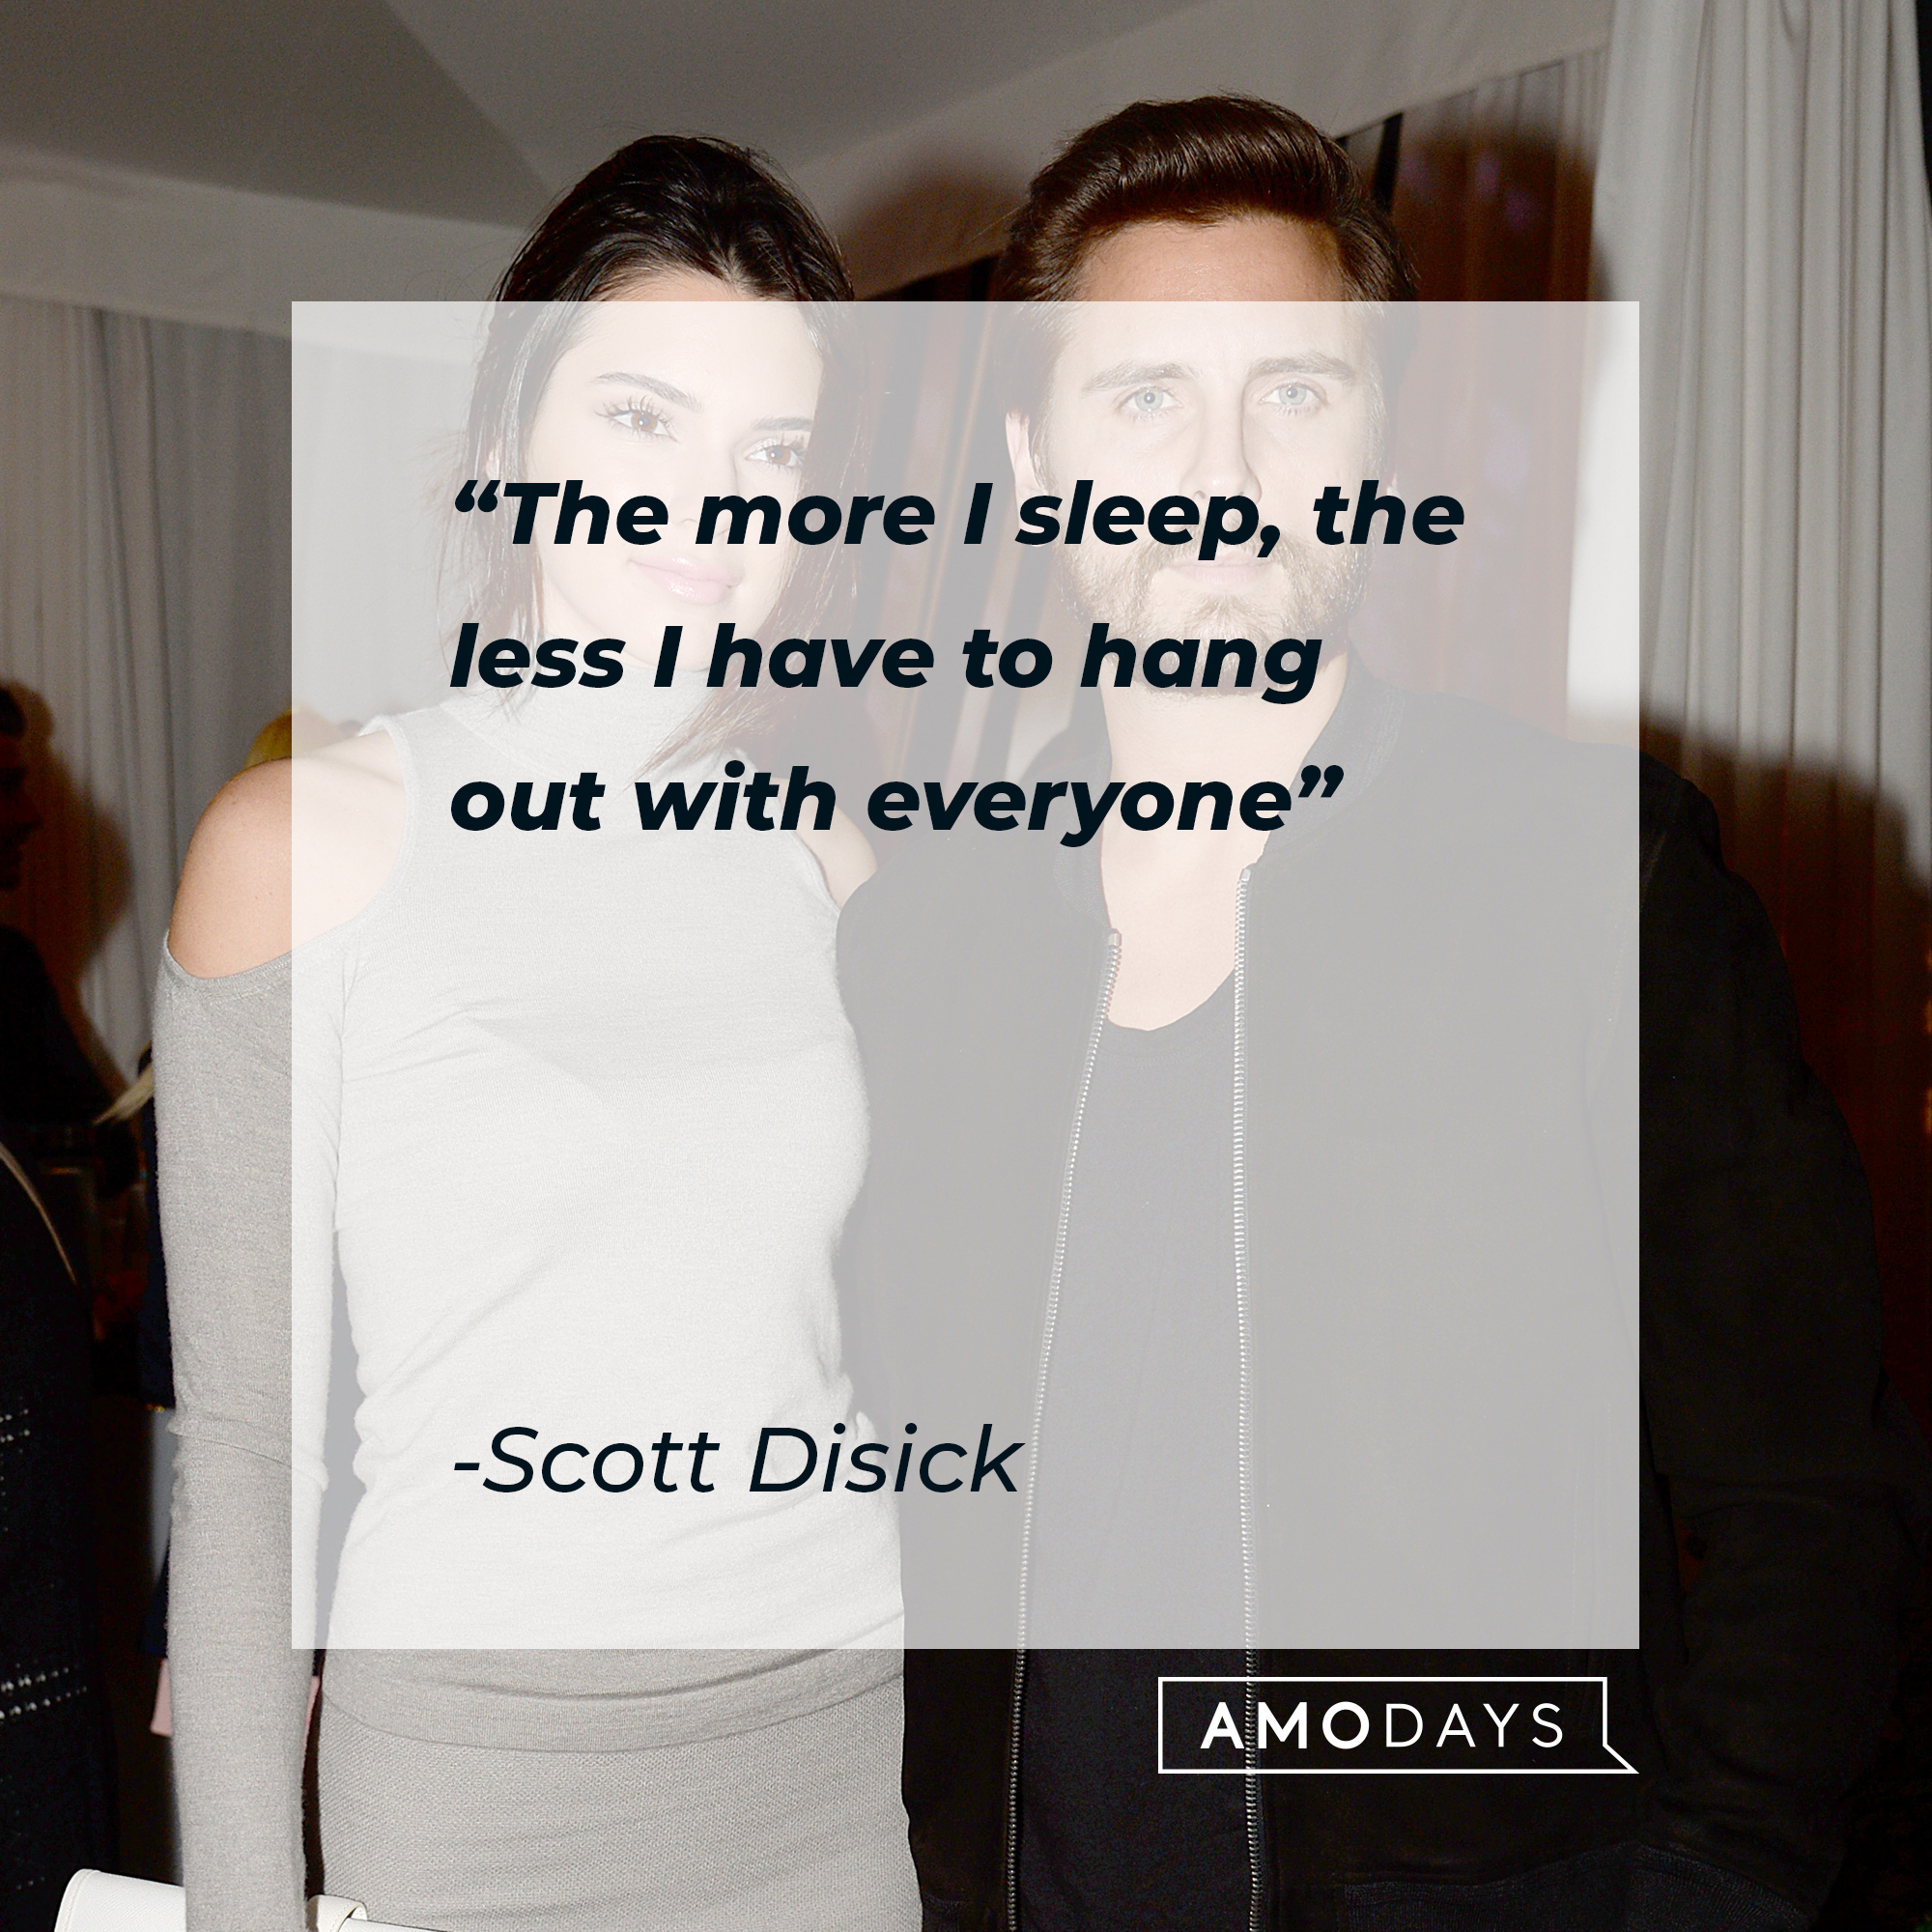 Scott Disick quote: "The more I sleep, the less I have to hang out with everyone" | Source: Getty Images